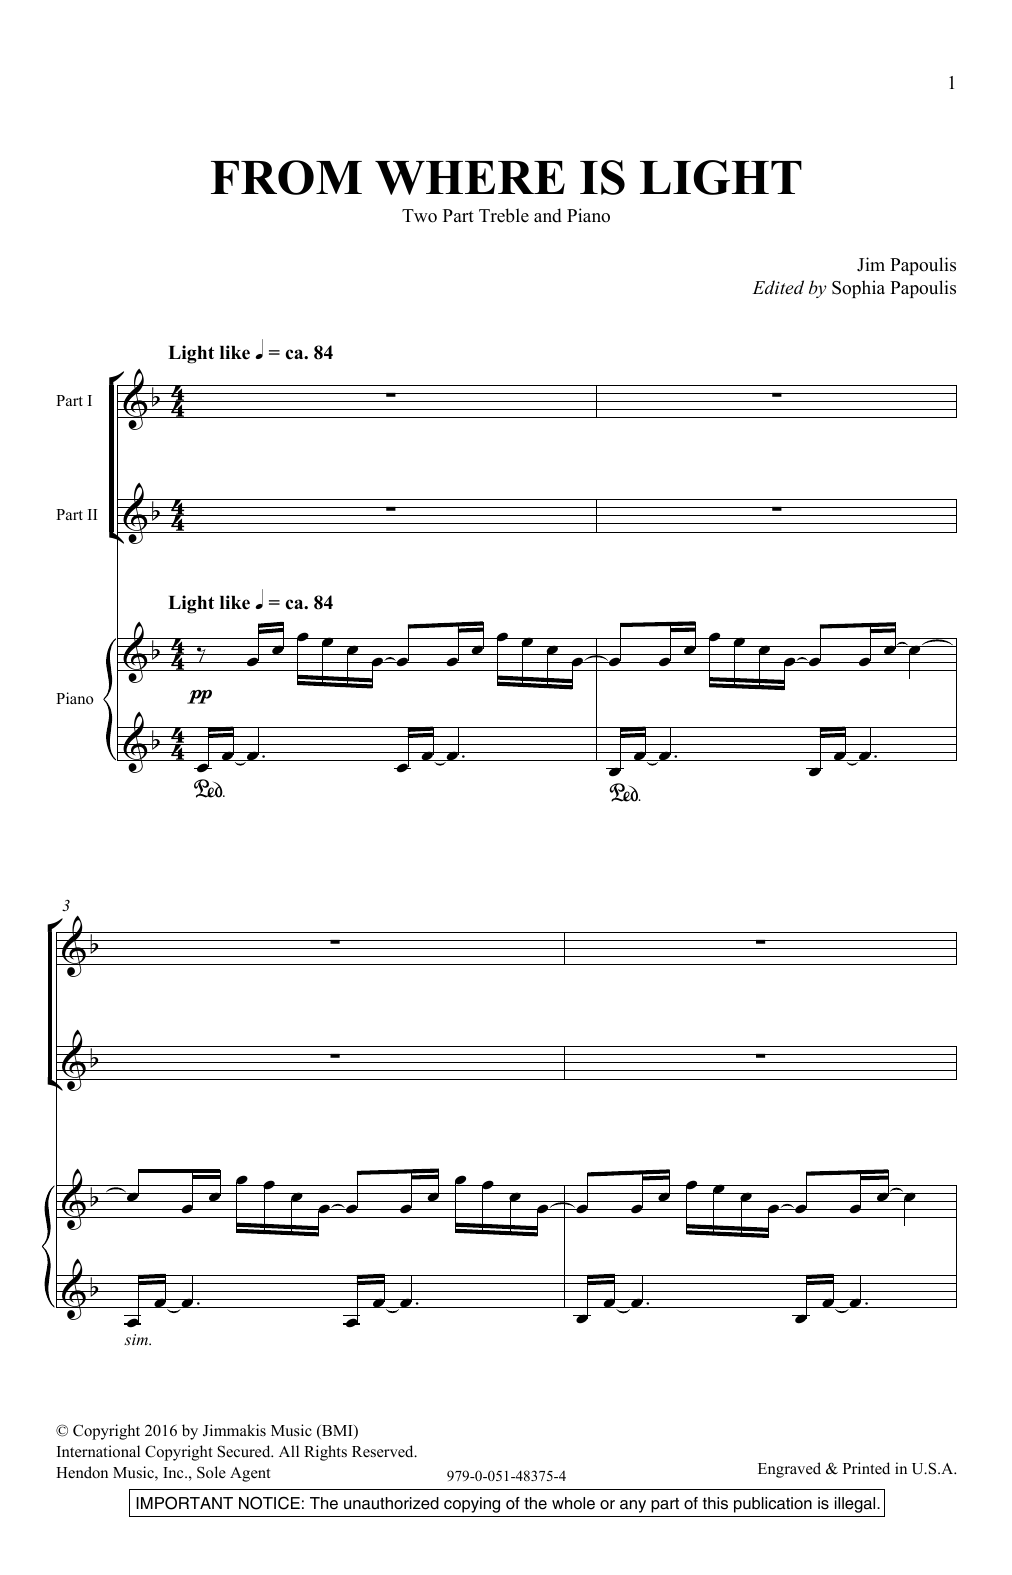 Download Jim Papoulis From Where Is Light Sheet Music